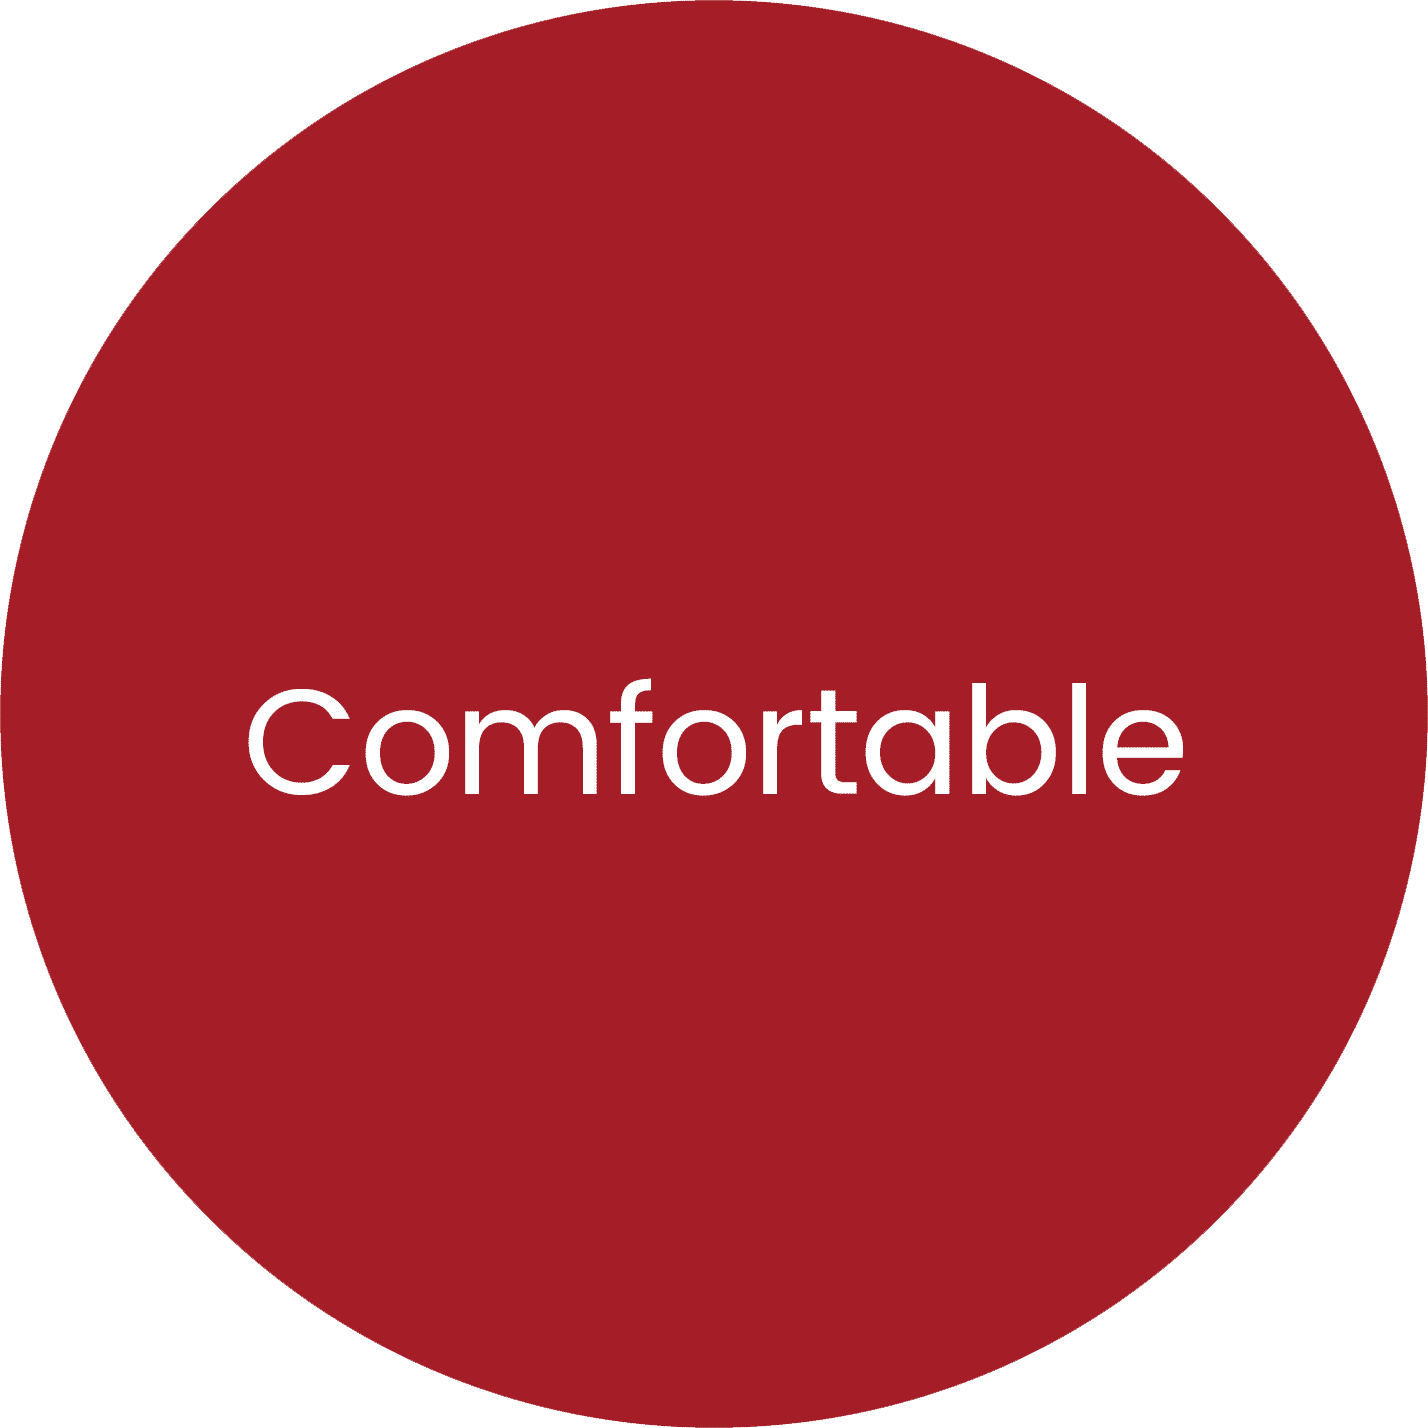 Comfortable written in red circle